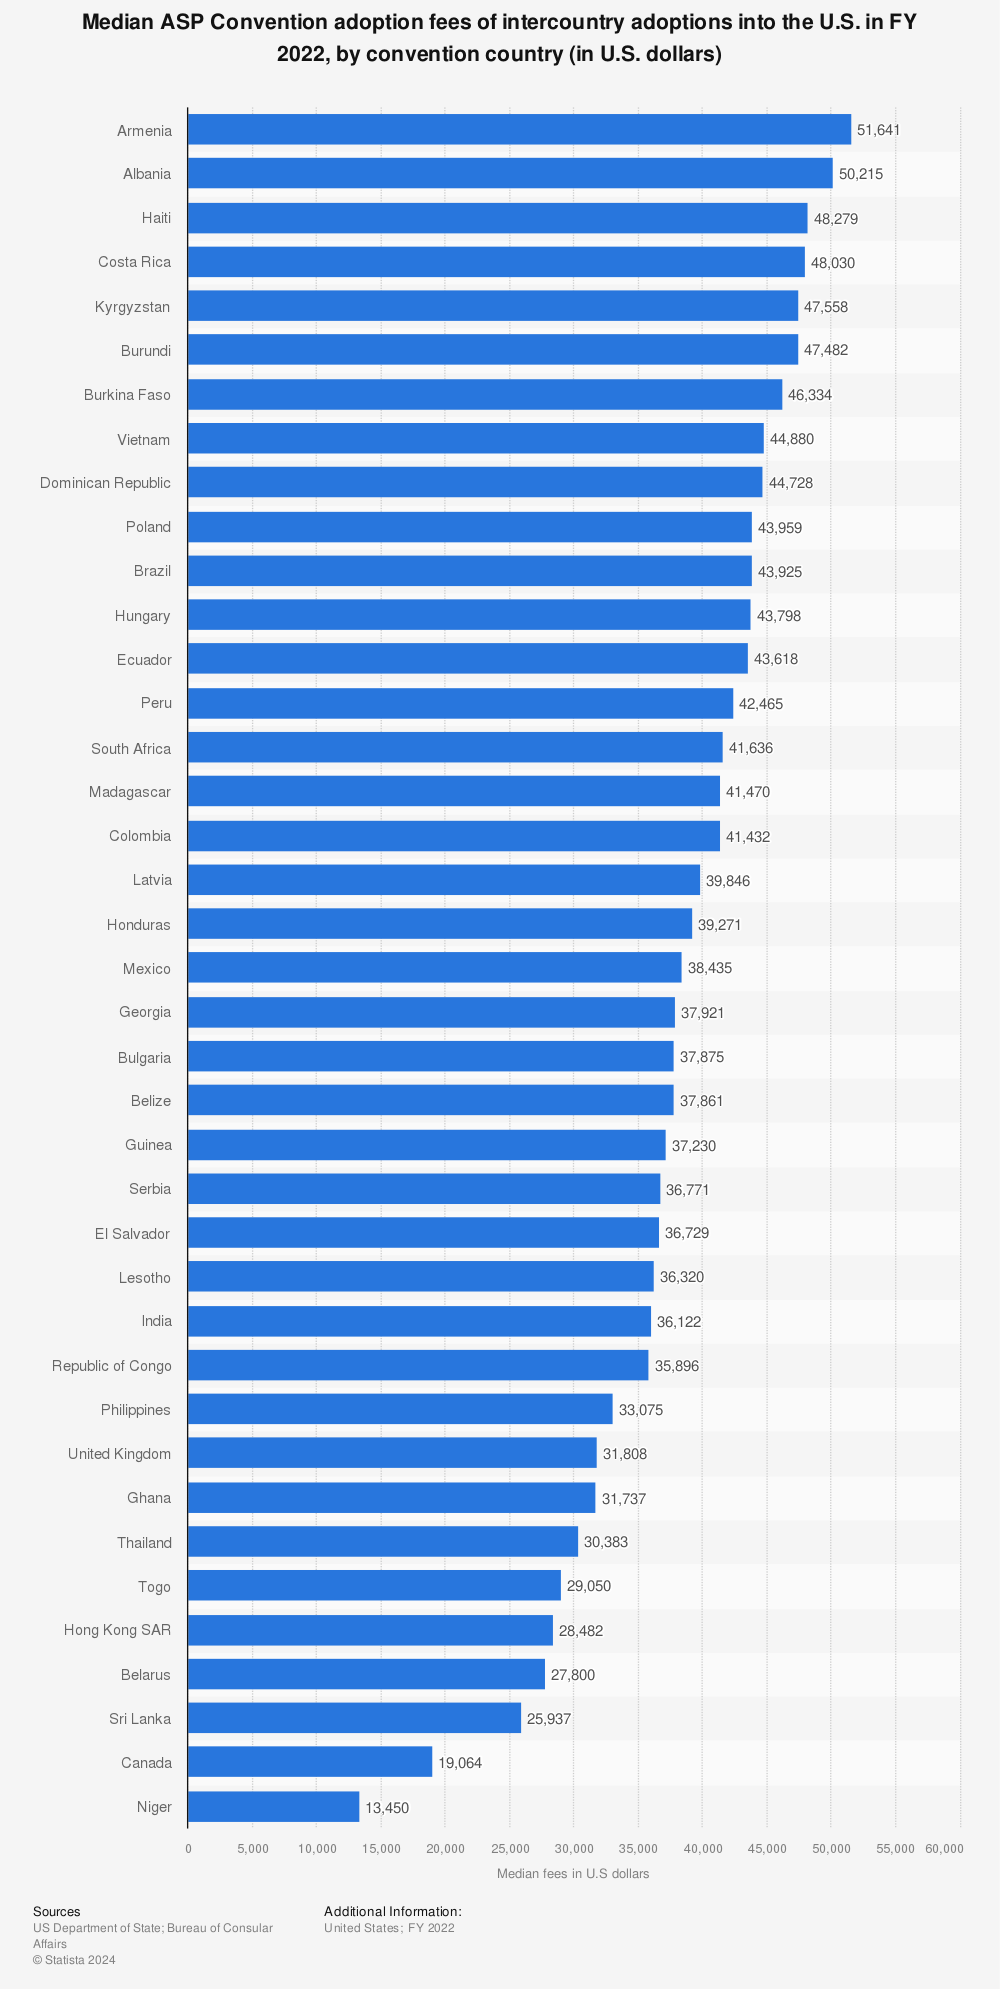 Statistic: Median ASP Convention adoption fees of intercountry adoptions into the U.S. in FY 2020, by convention country (in U.S. dollars) | Statista